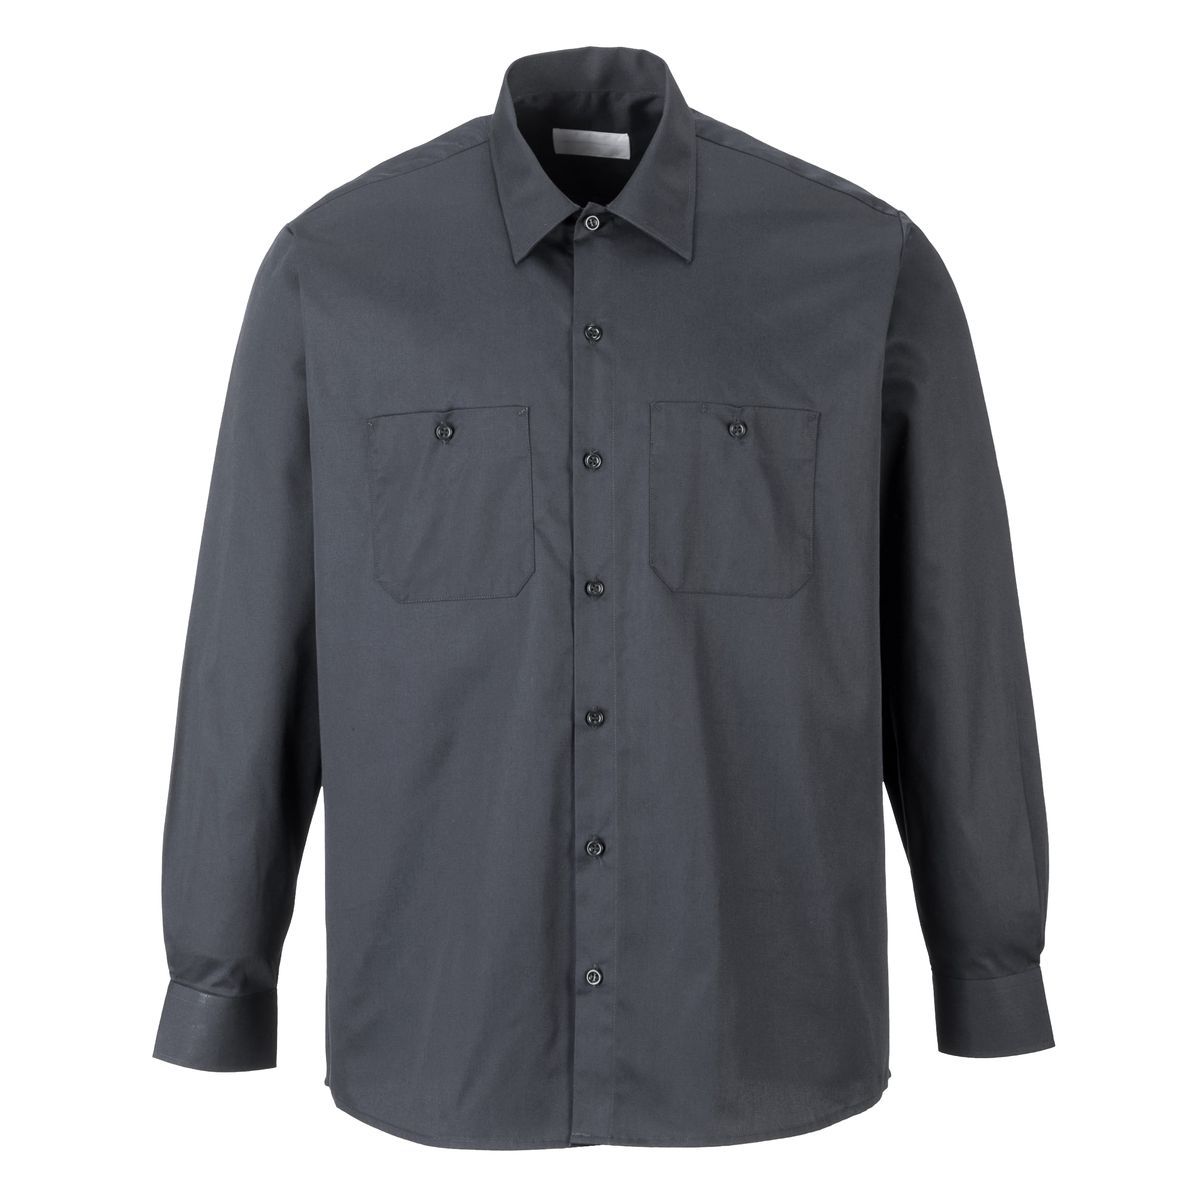 Style S125 Industrial Work Shirt LS-1